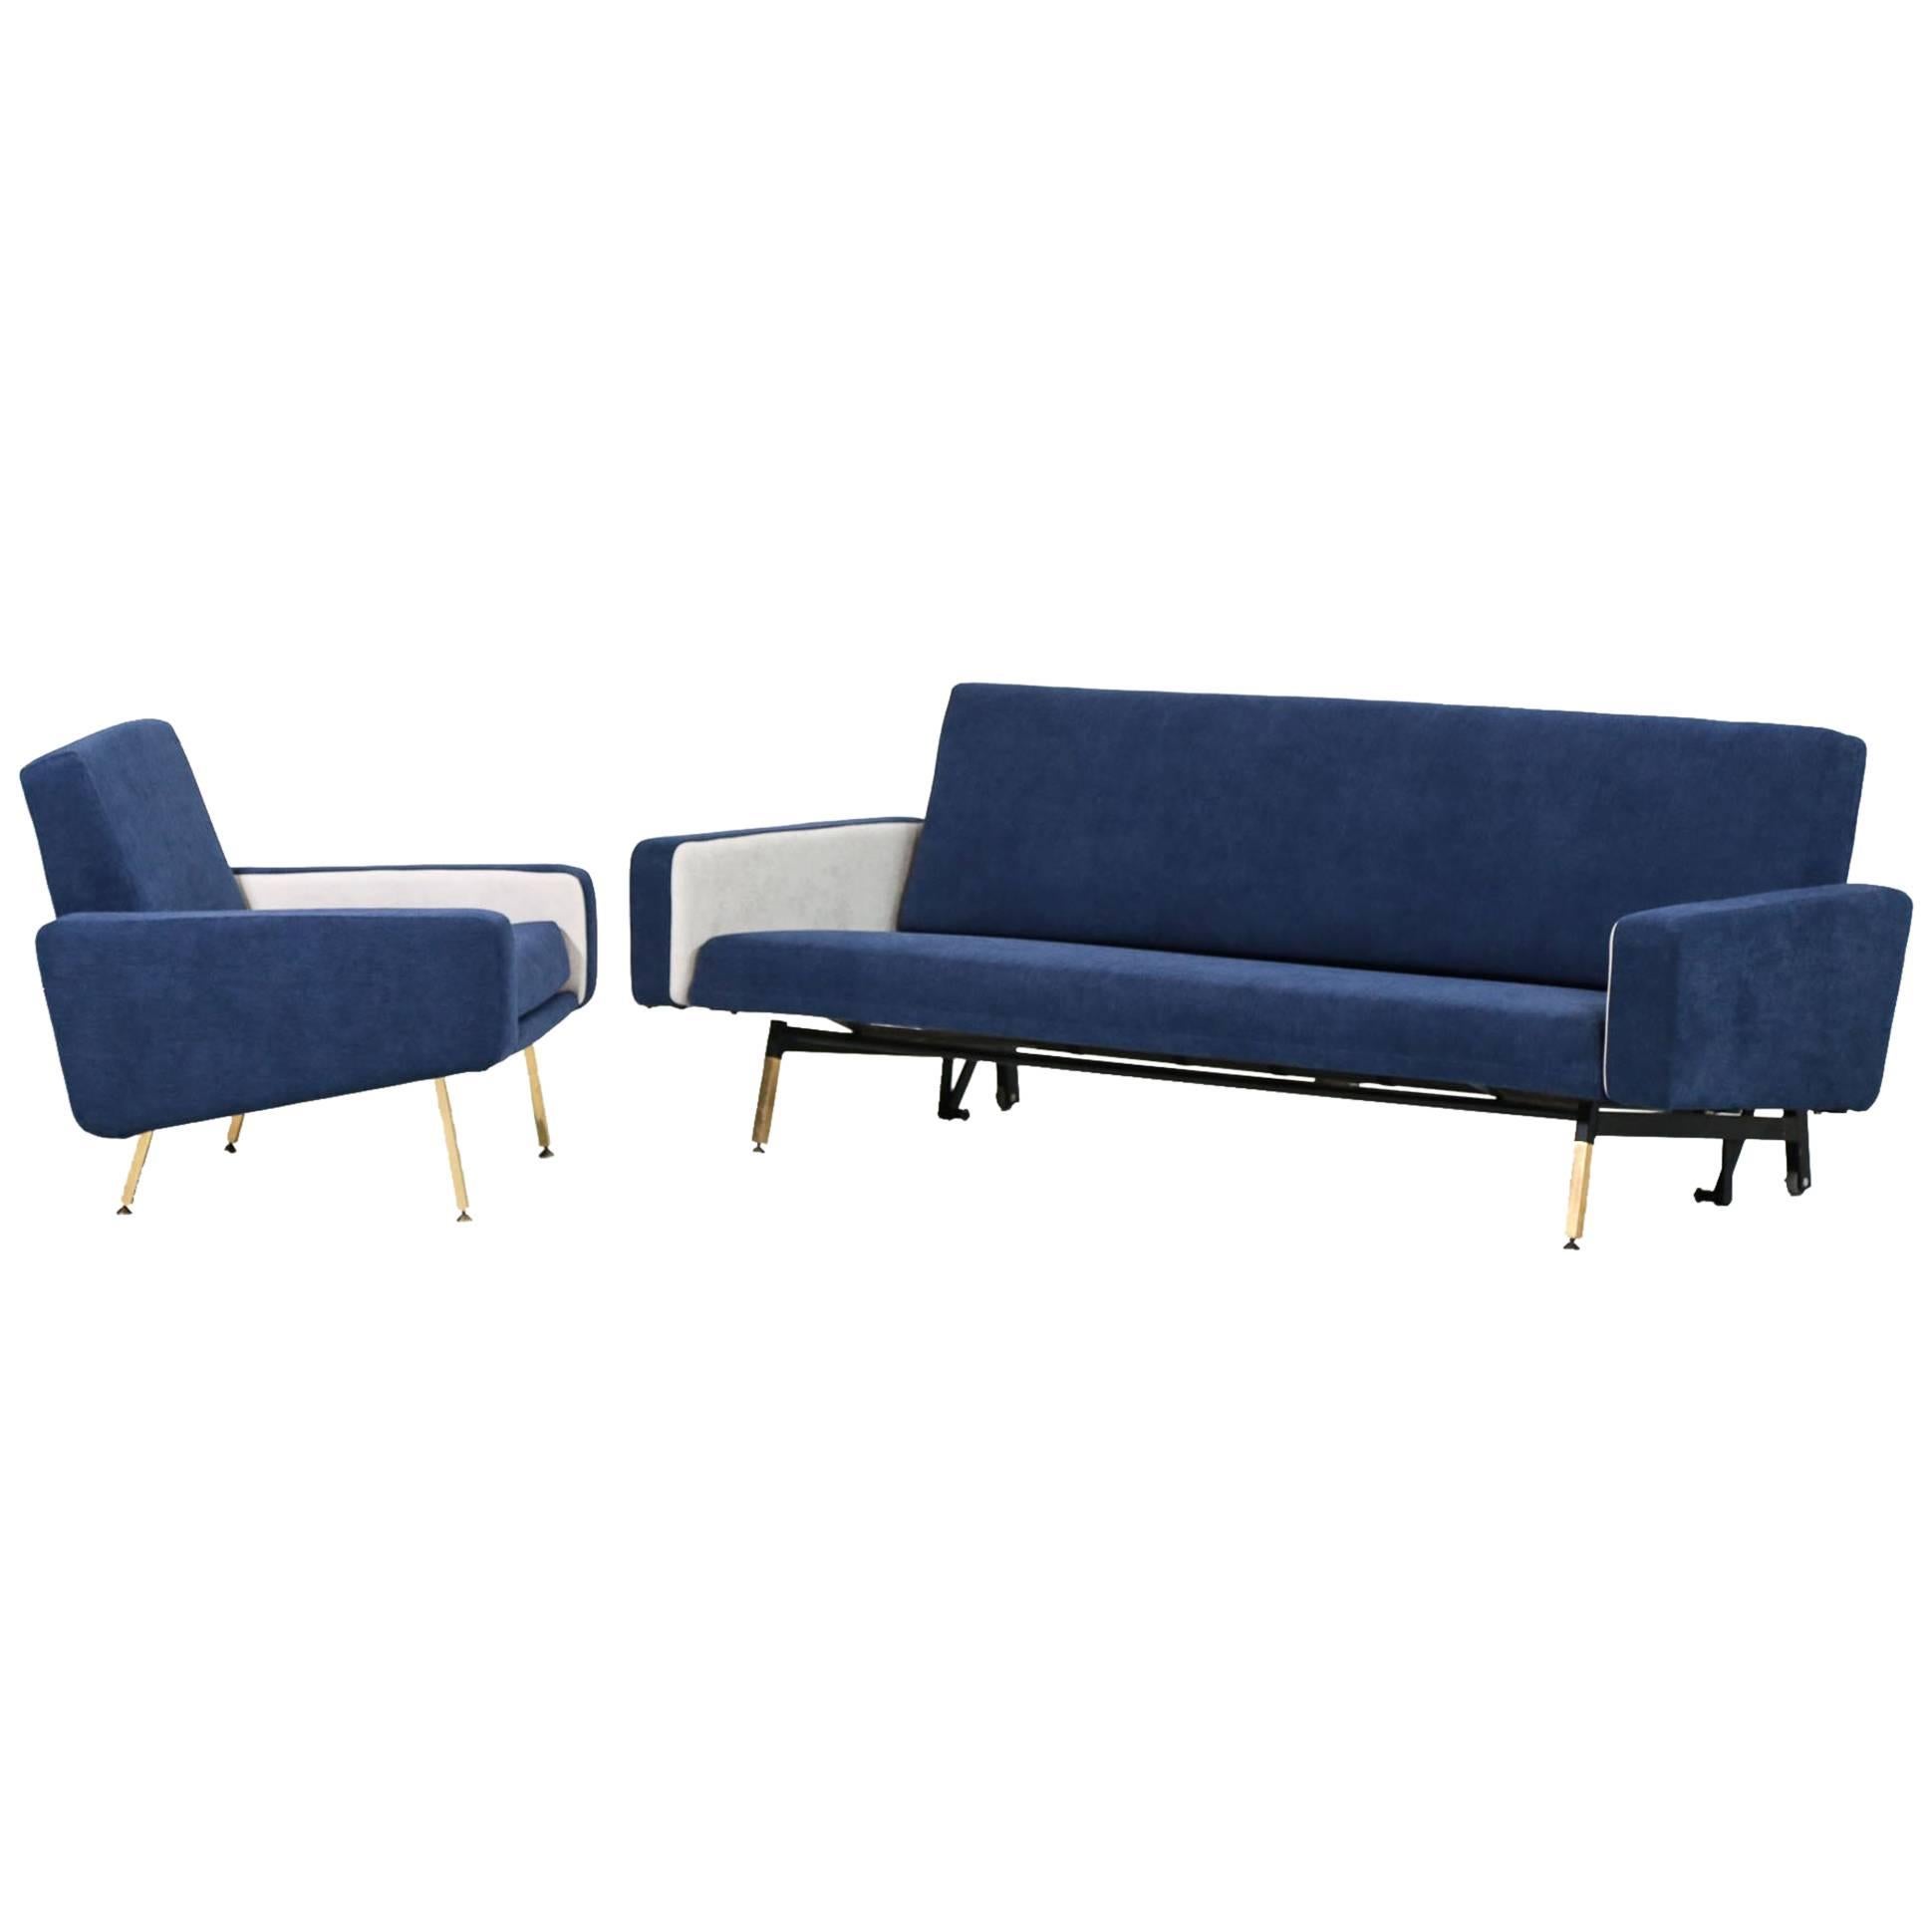 Set of Pierre Guariche Sofa Bed and Pair of Armchairs for Airborne French Design